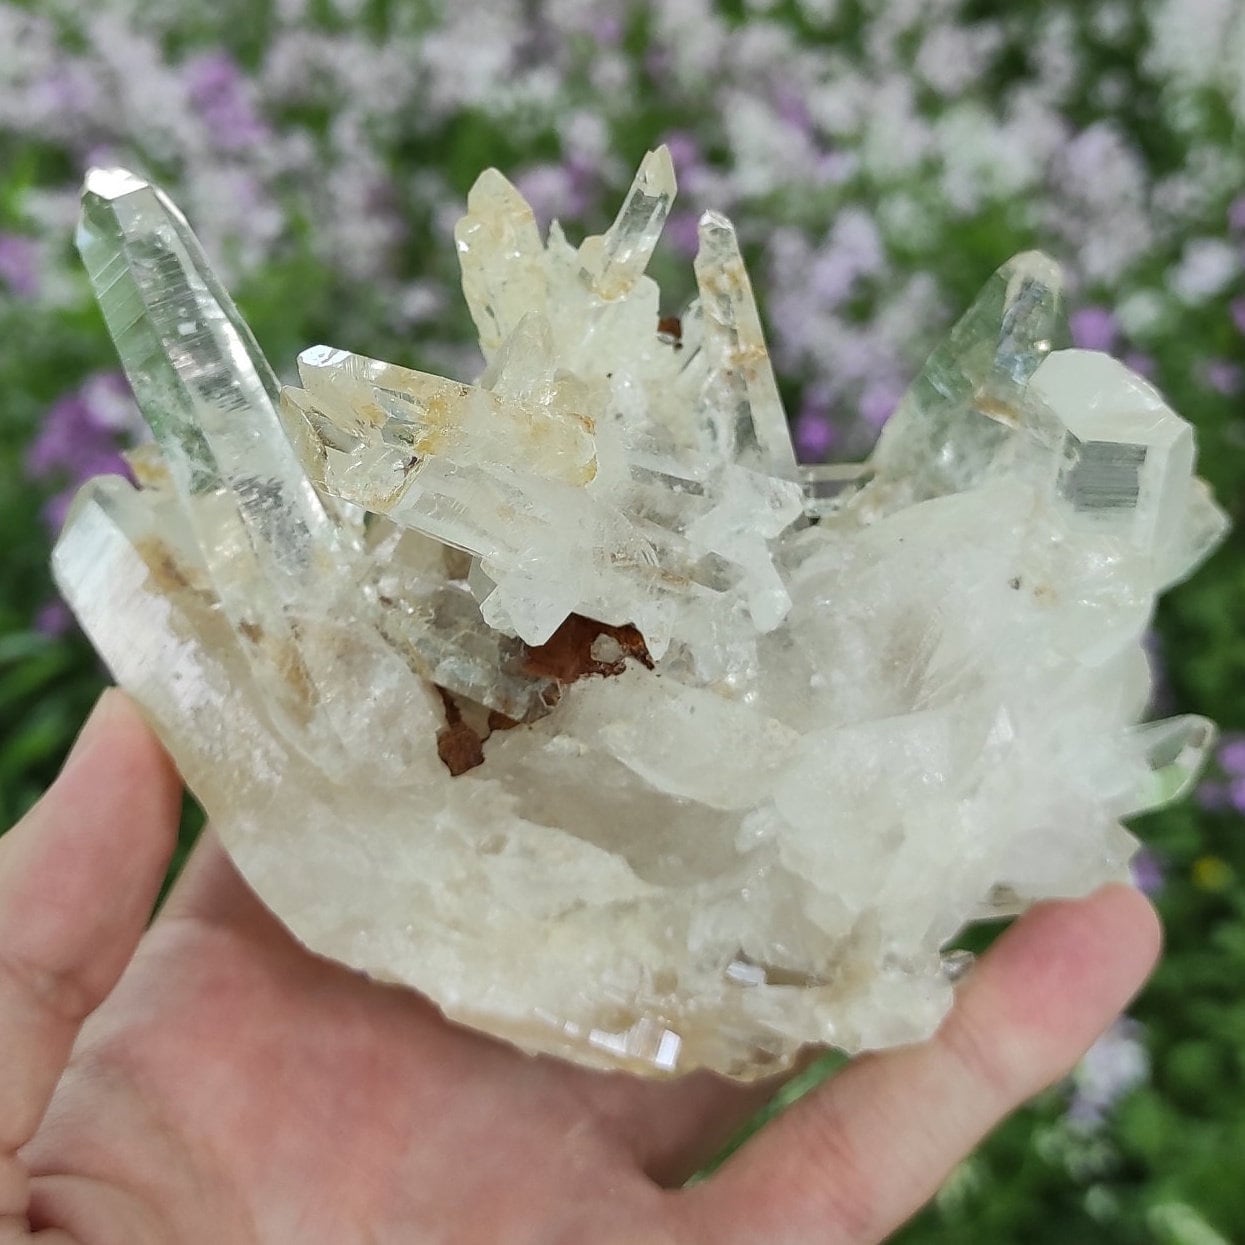 643g Clear Quartz Crystal Cluster from Colombia - Untreated Quartz Point Cluster -  Mineral Specimen - White Quartz Crystal - Clear Quartz